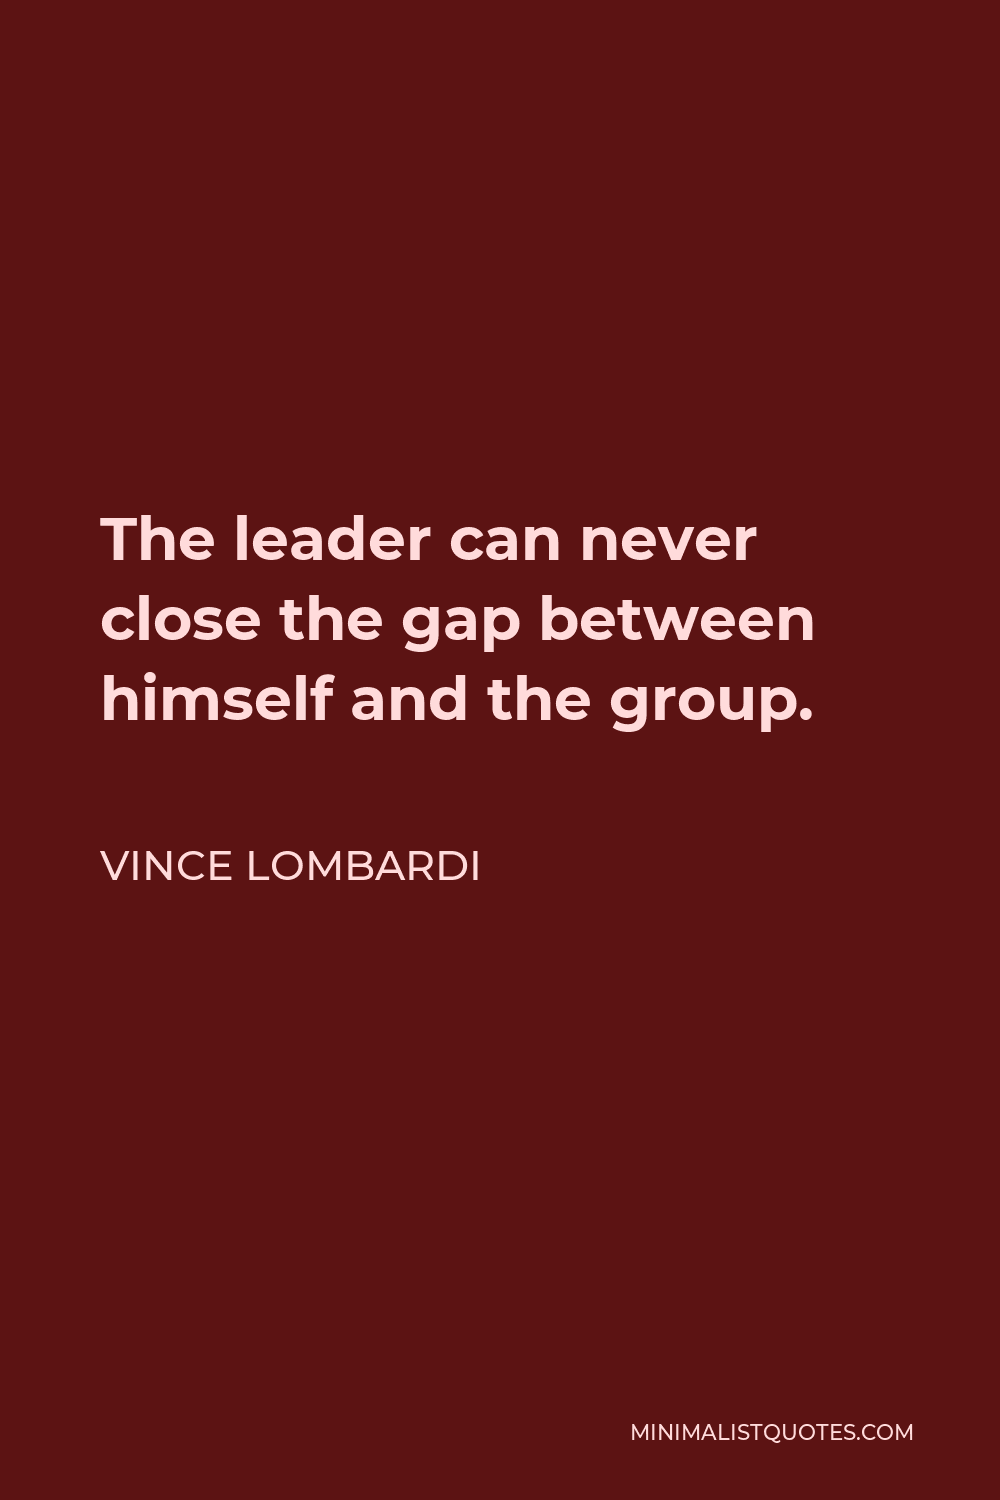 Vince Lombardi Quote - The leader can never close the gap between himself and the group.